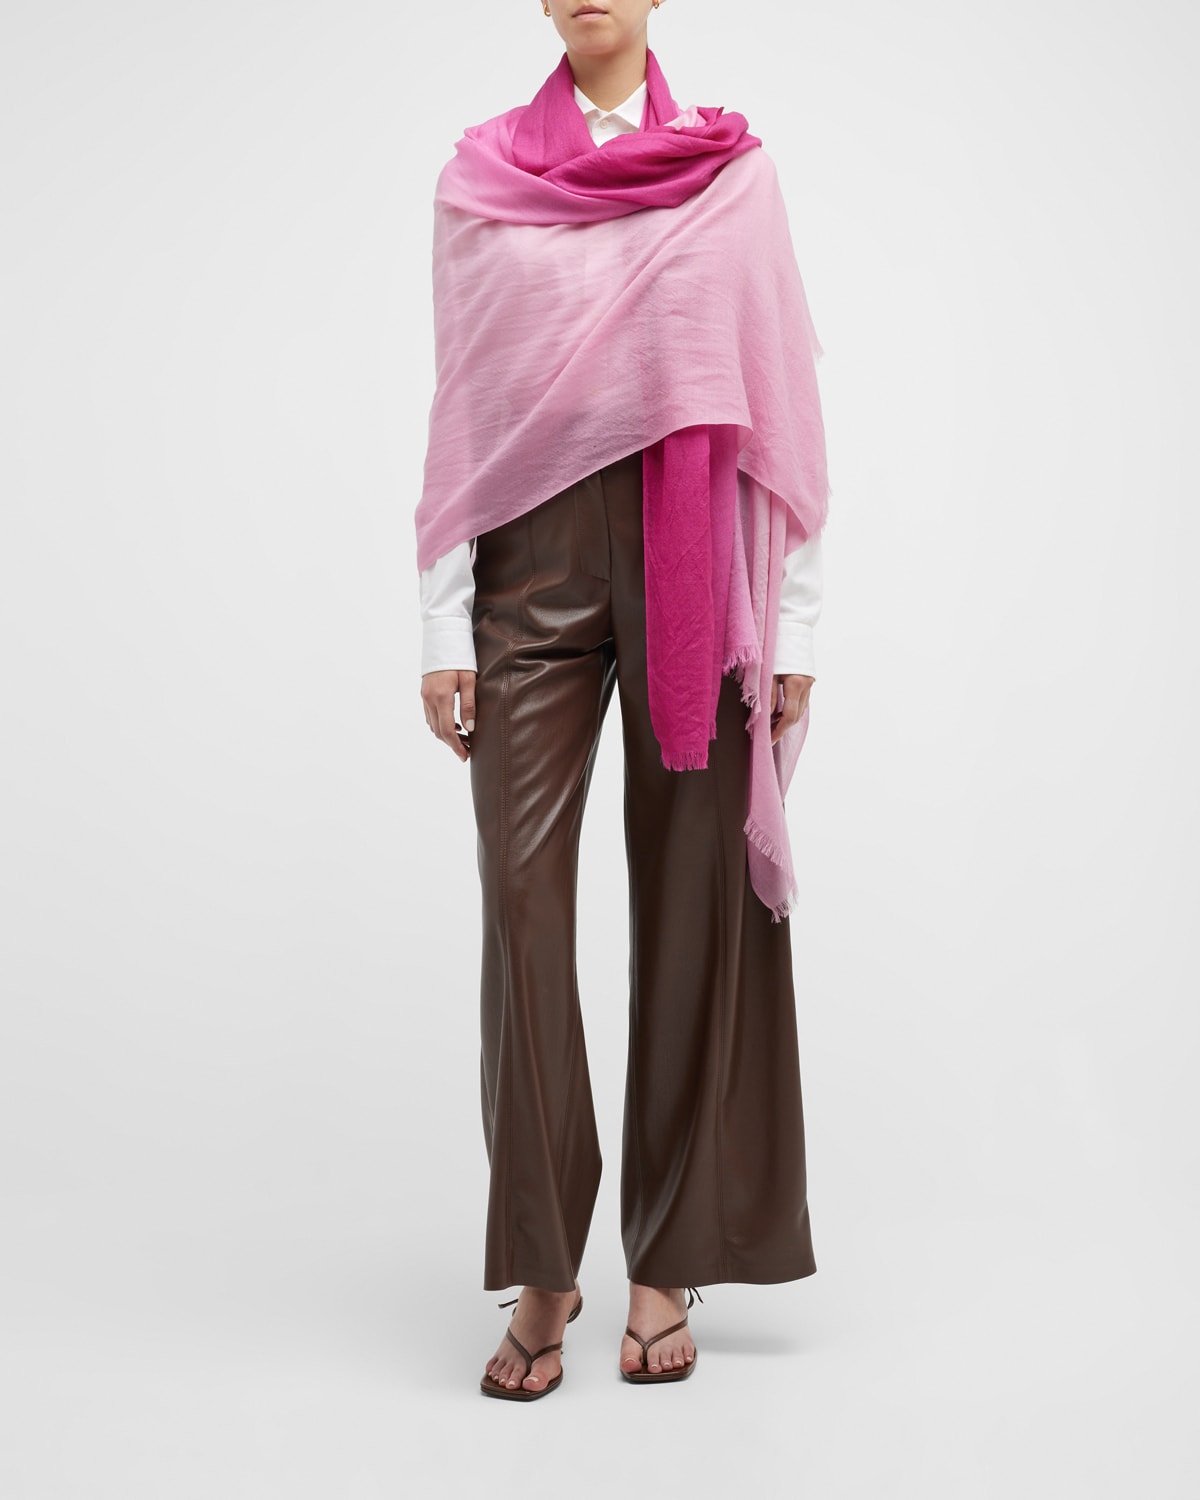 Shop Sofia Cashmere Cashmere Ombre Scarf In Rosy Pink Ombre